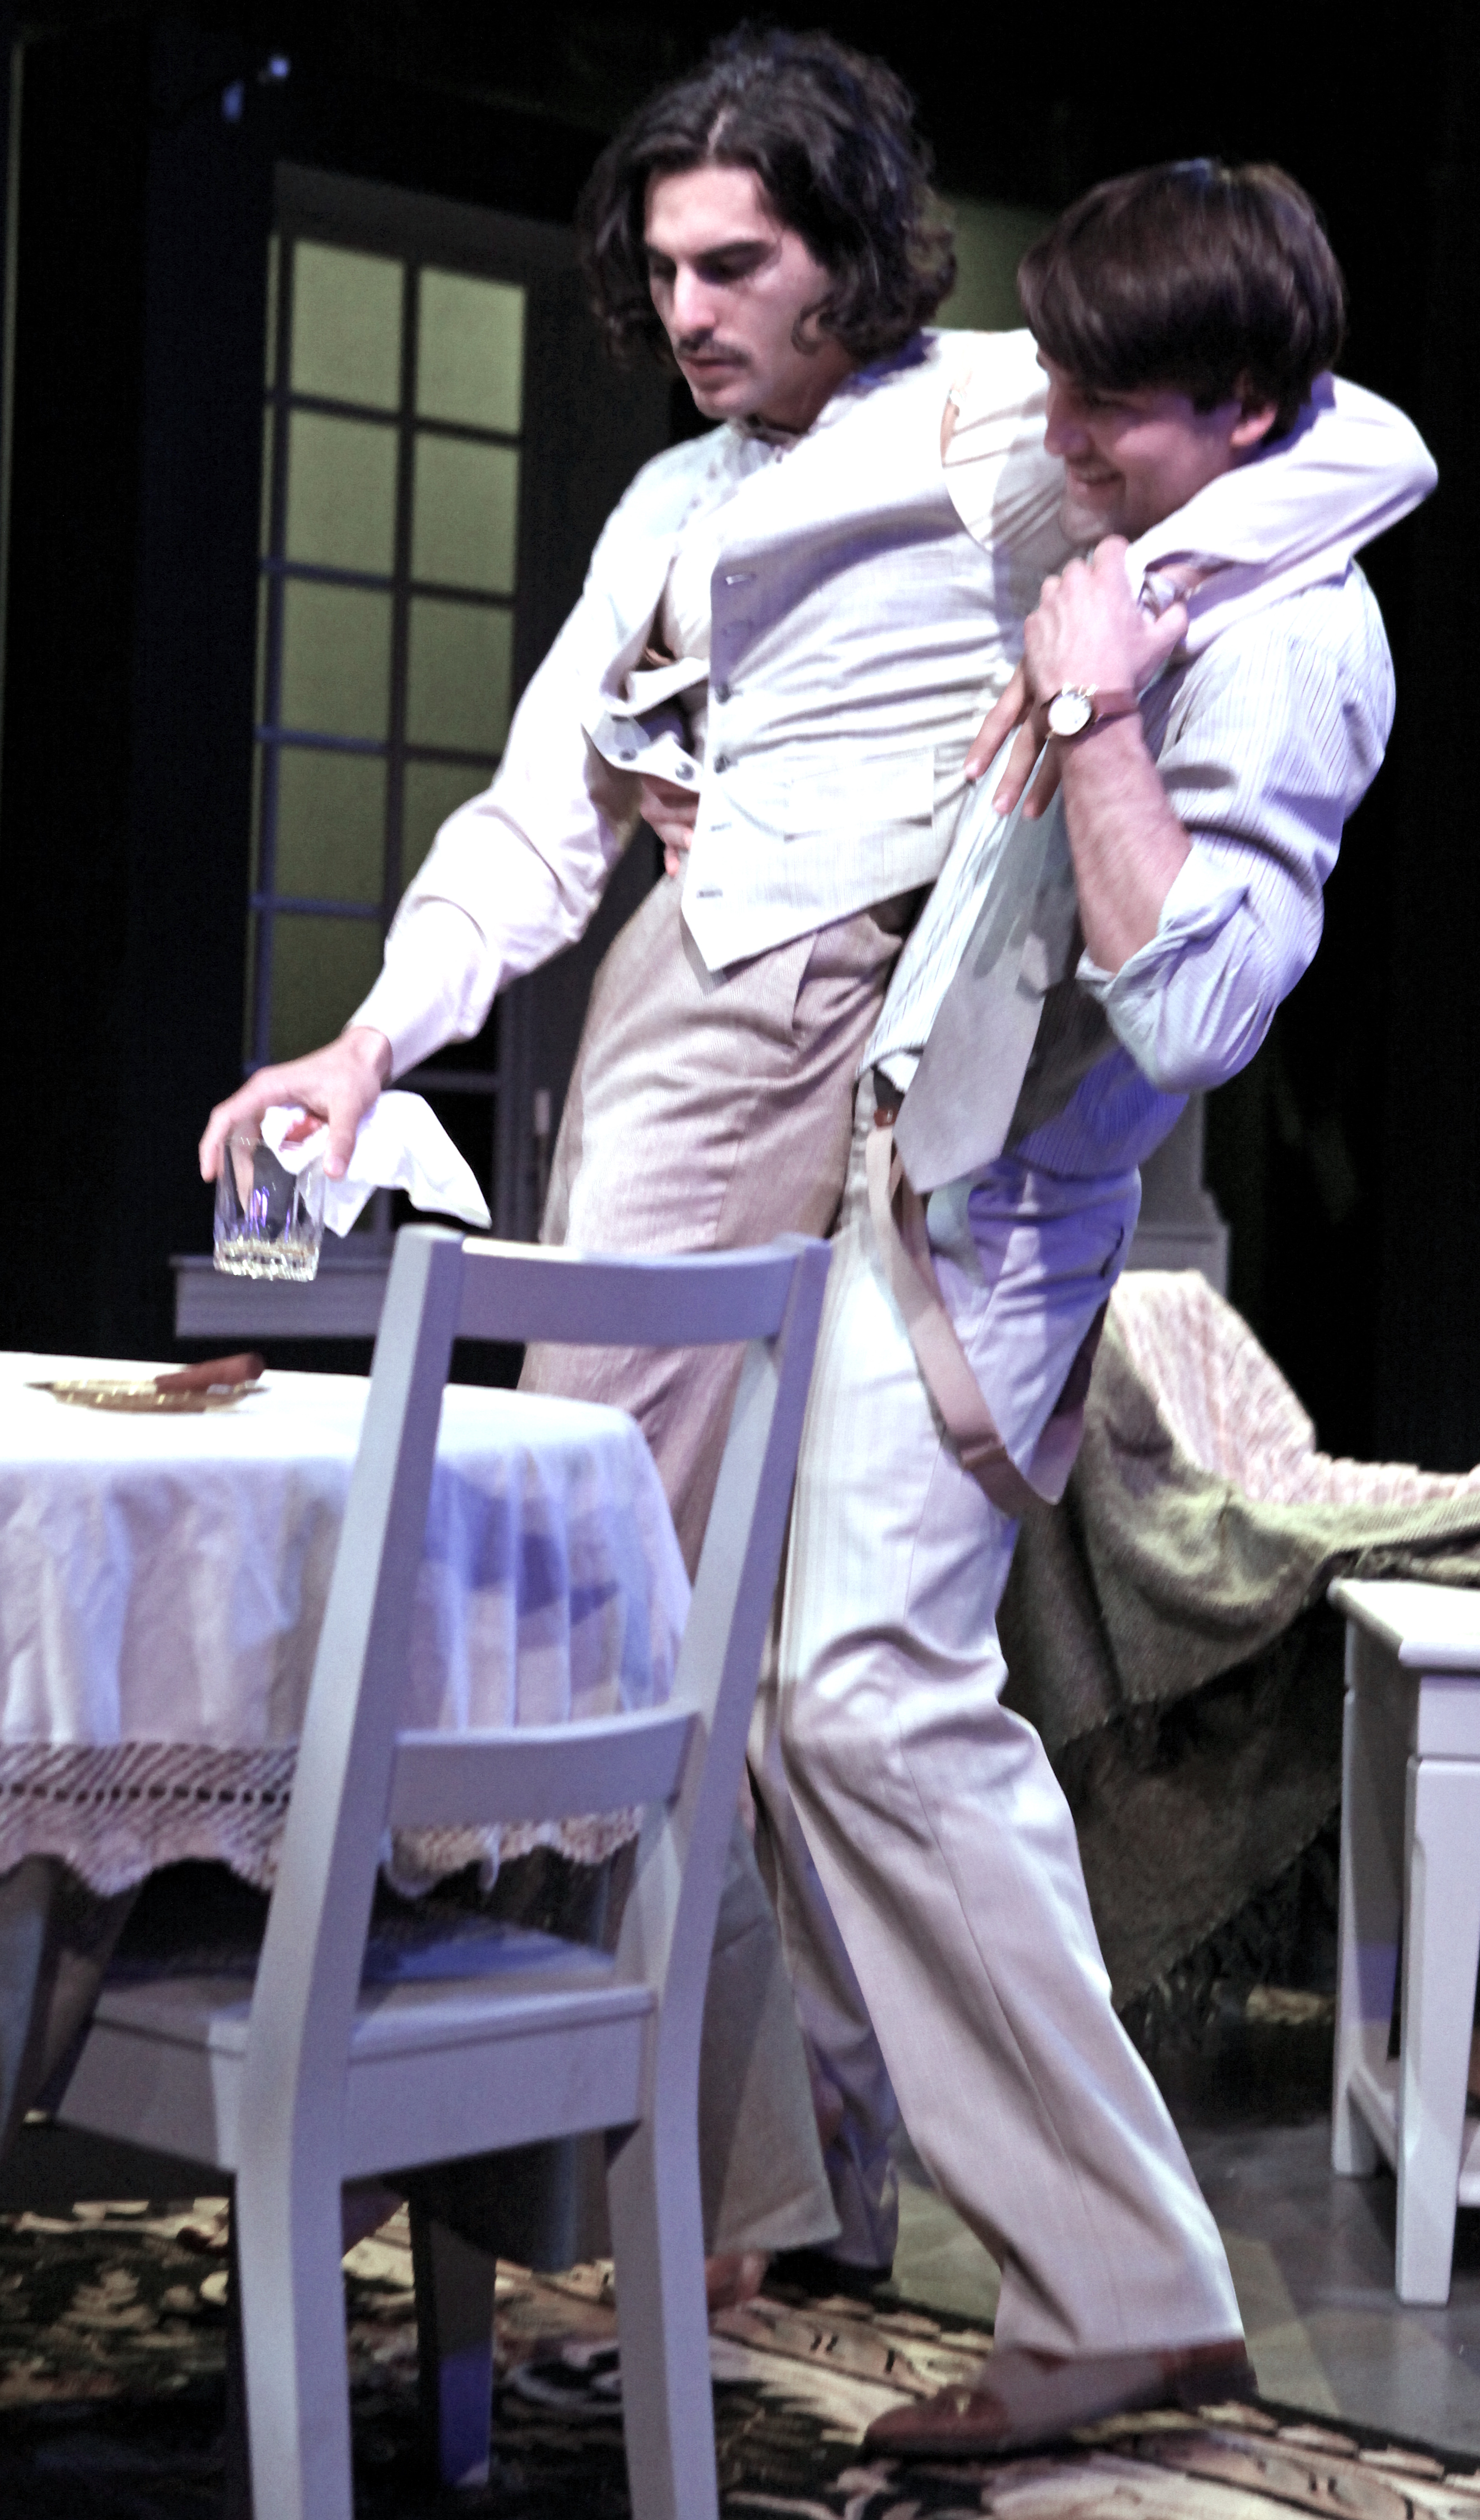 R-J as Edmund in Long Day's Journey Into Night with co-star Brian Phillips